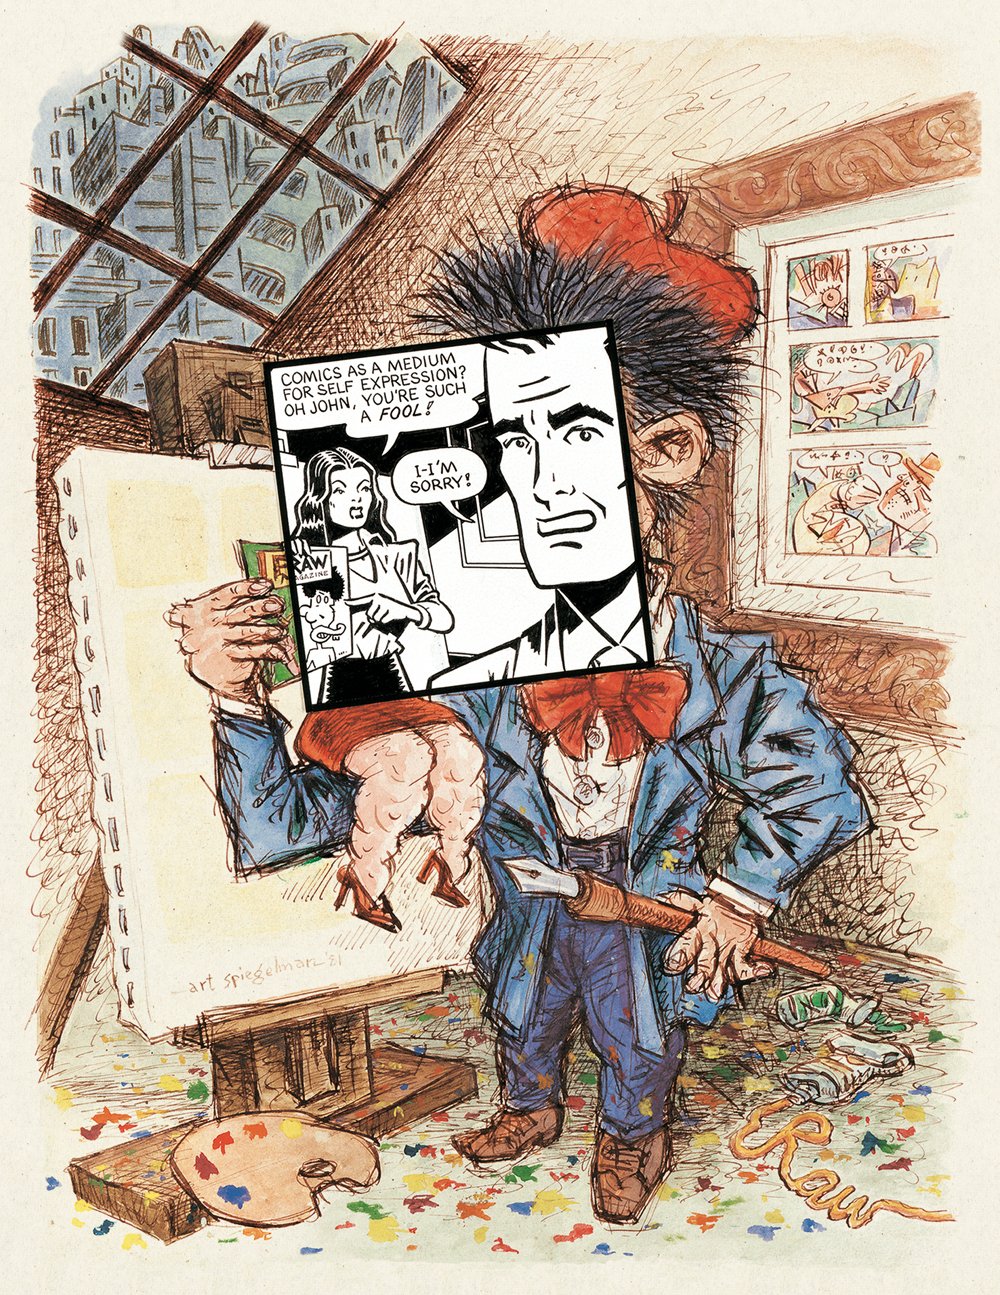 Happy Birthday to Art Spiegelman - Cover art for Print magazine - May/June 1981 